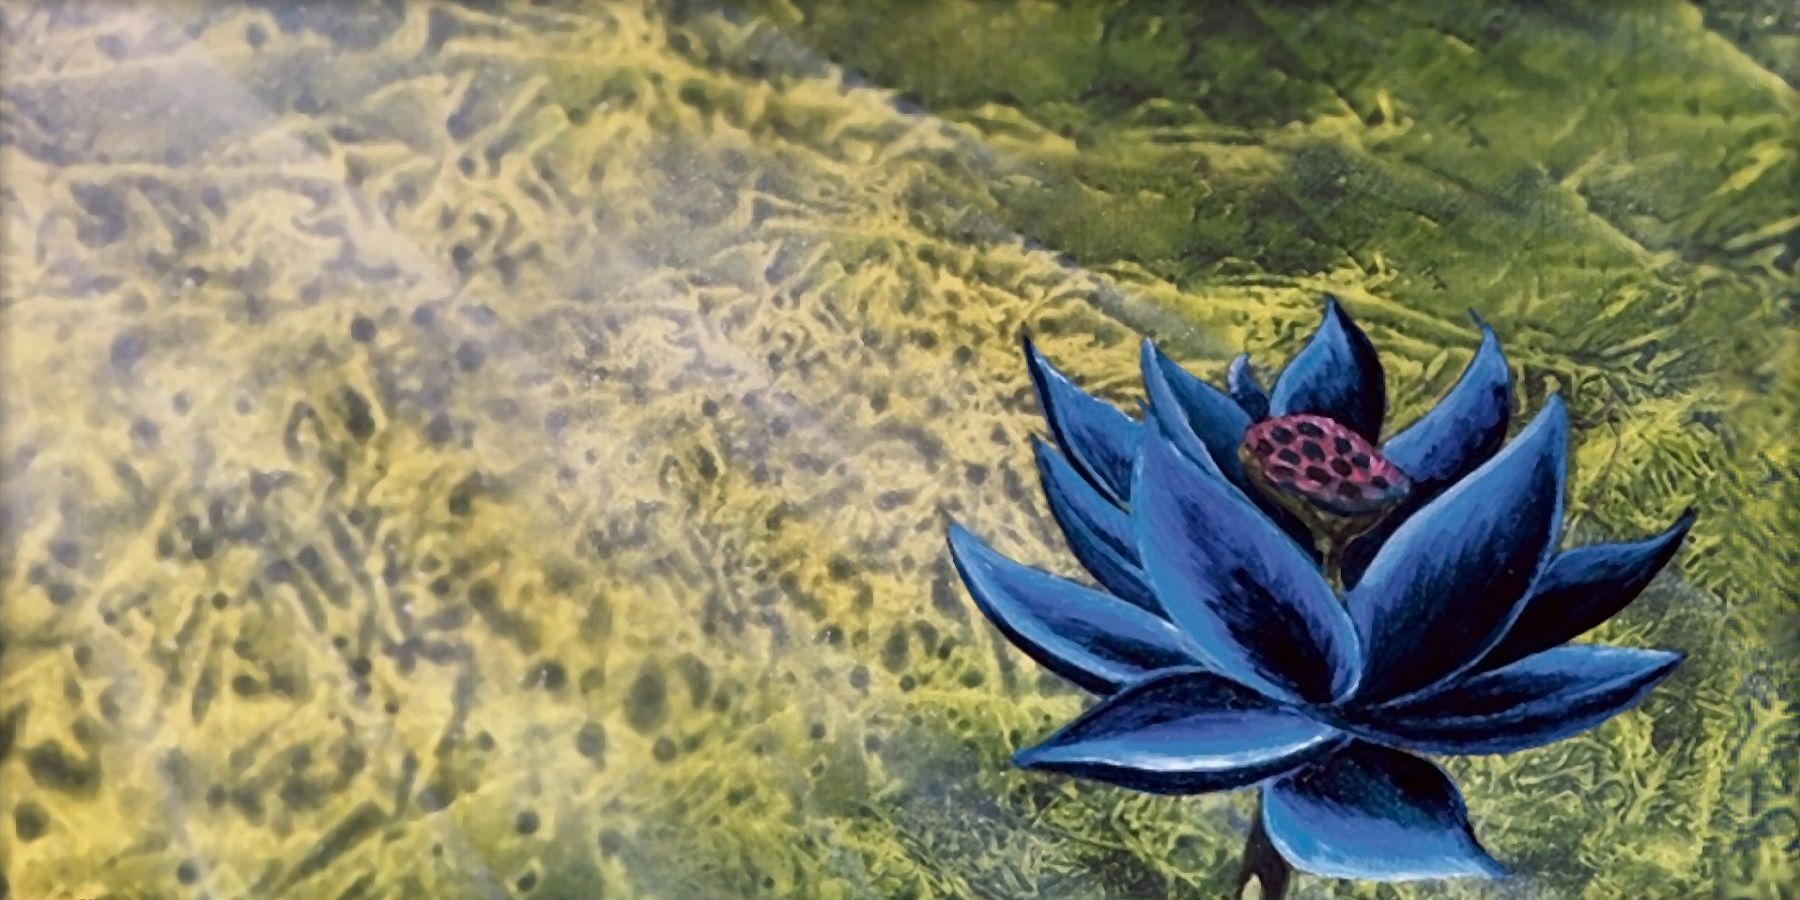 The Black Lotus is one of the most sought after cards in Magic history.